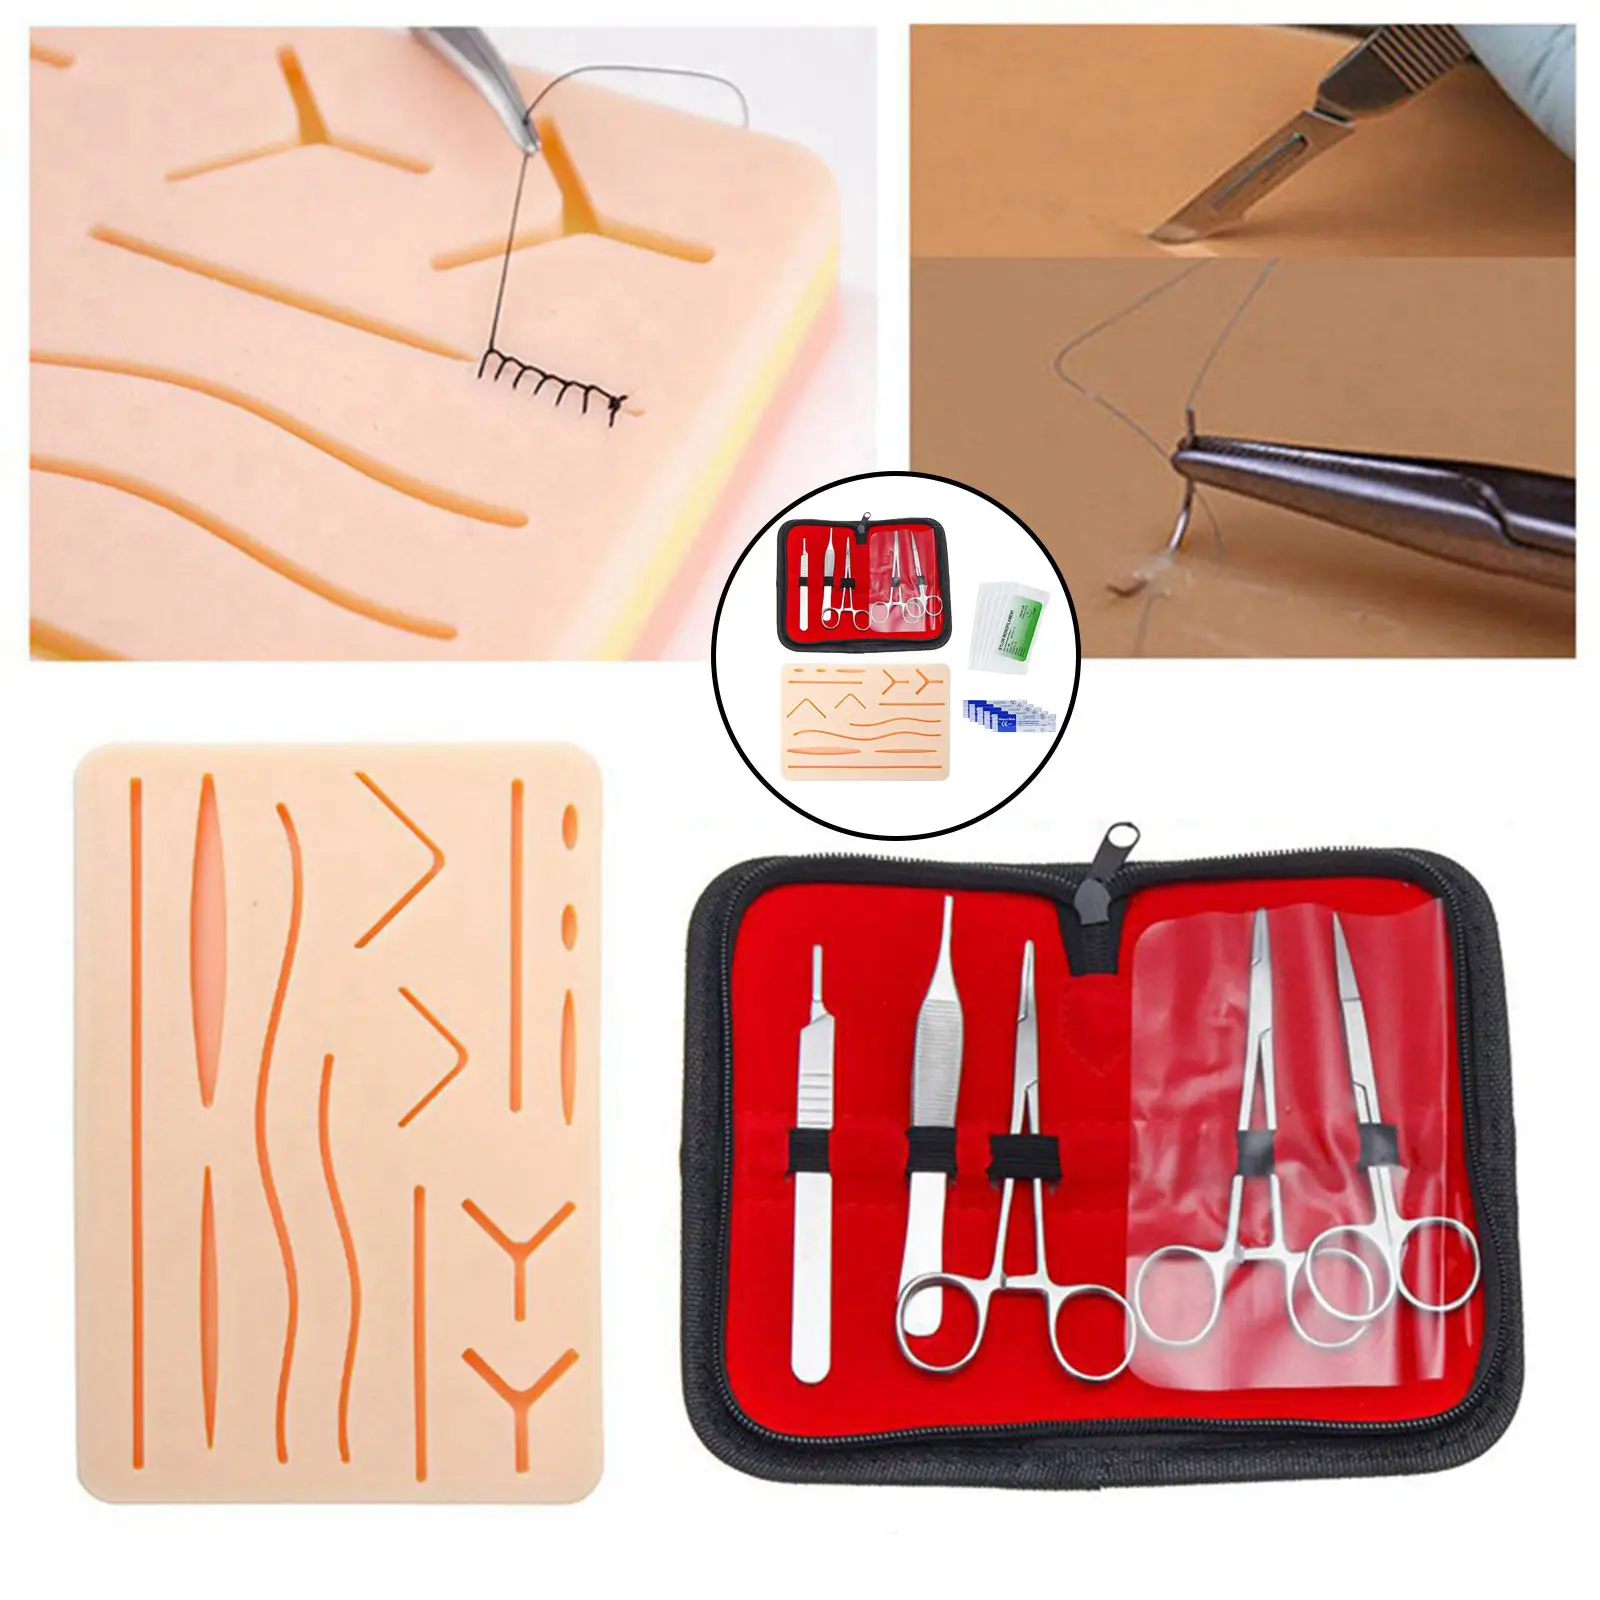 Premium Suturing Skill Trainer Pre-Cut Wounds Pad Skin Training Model for Practicing Dermatology (Training Practice Only)